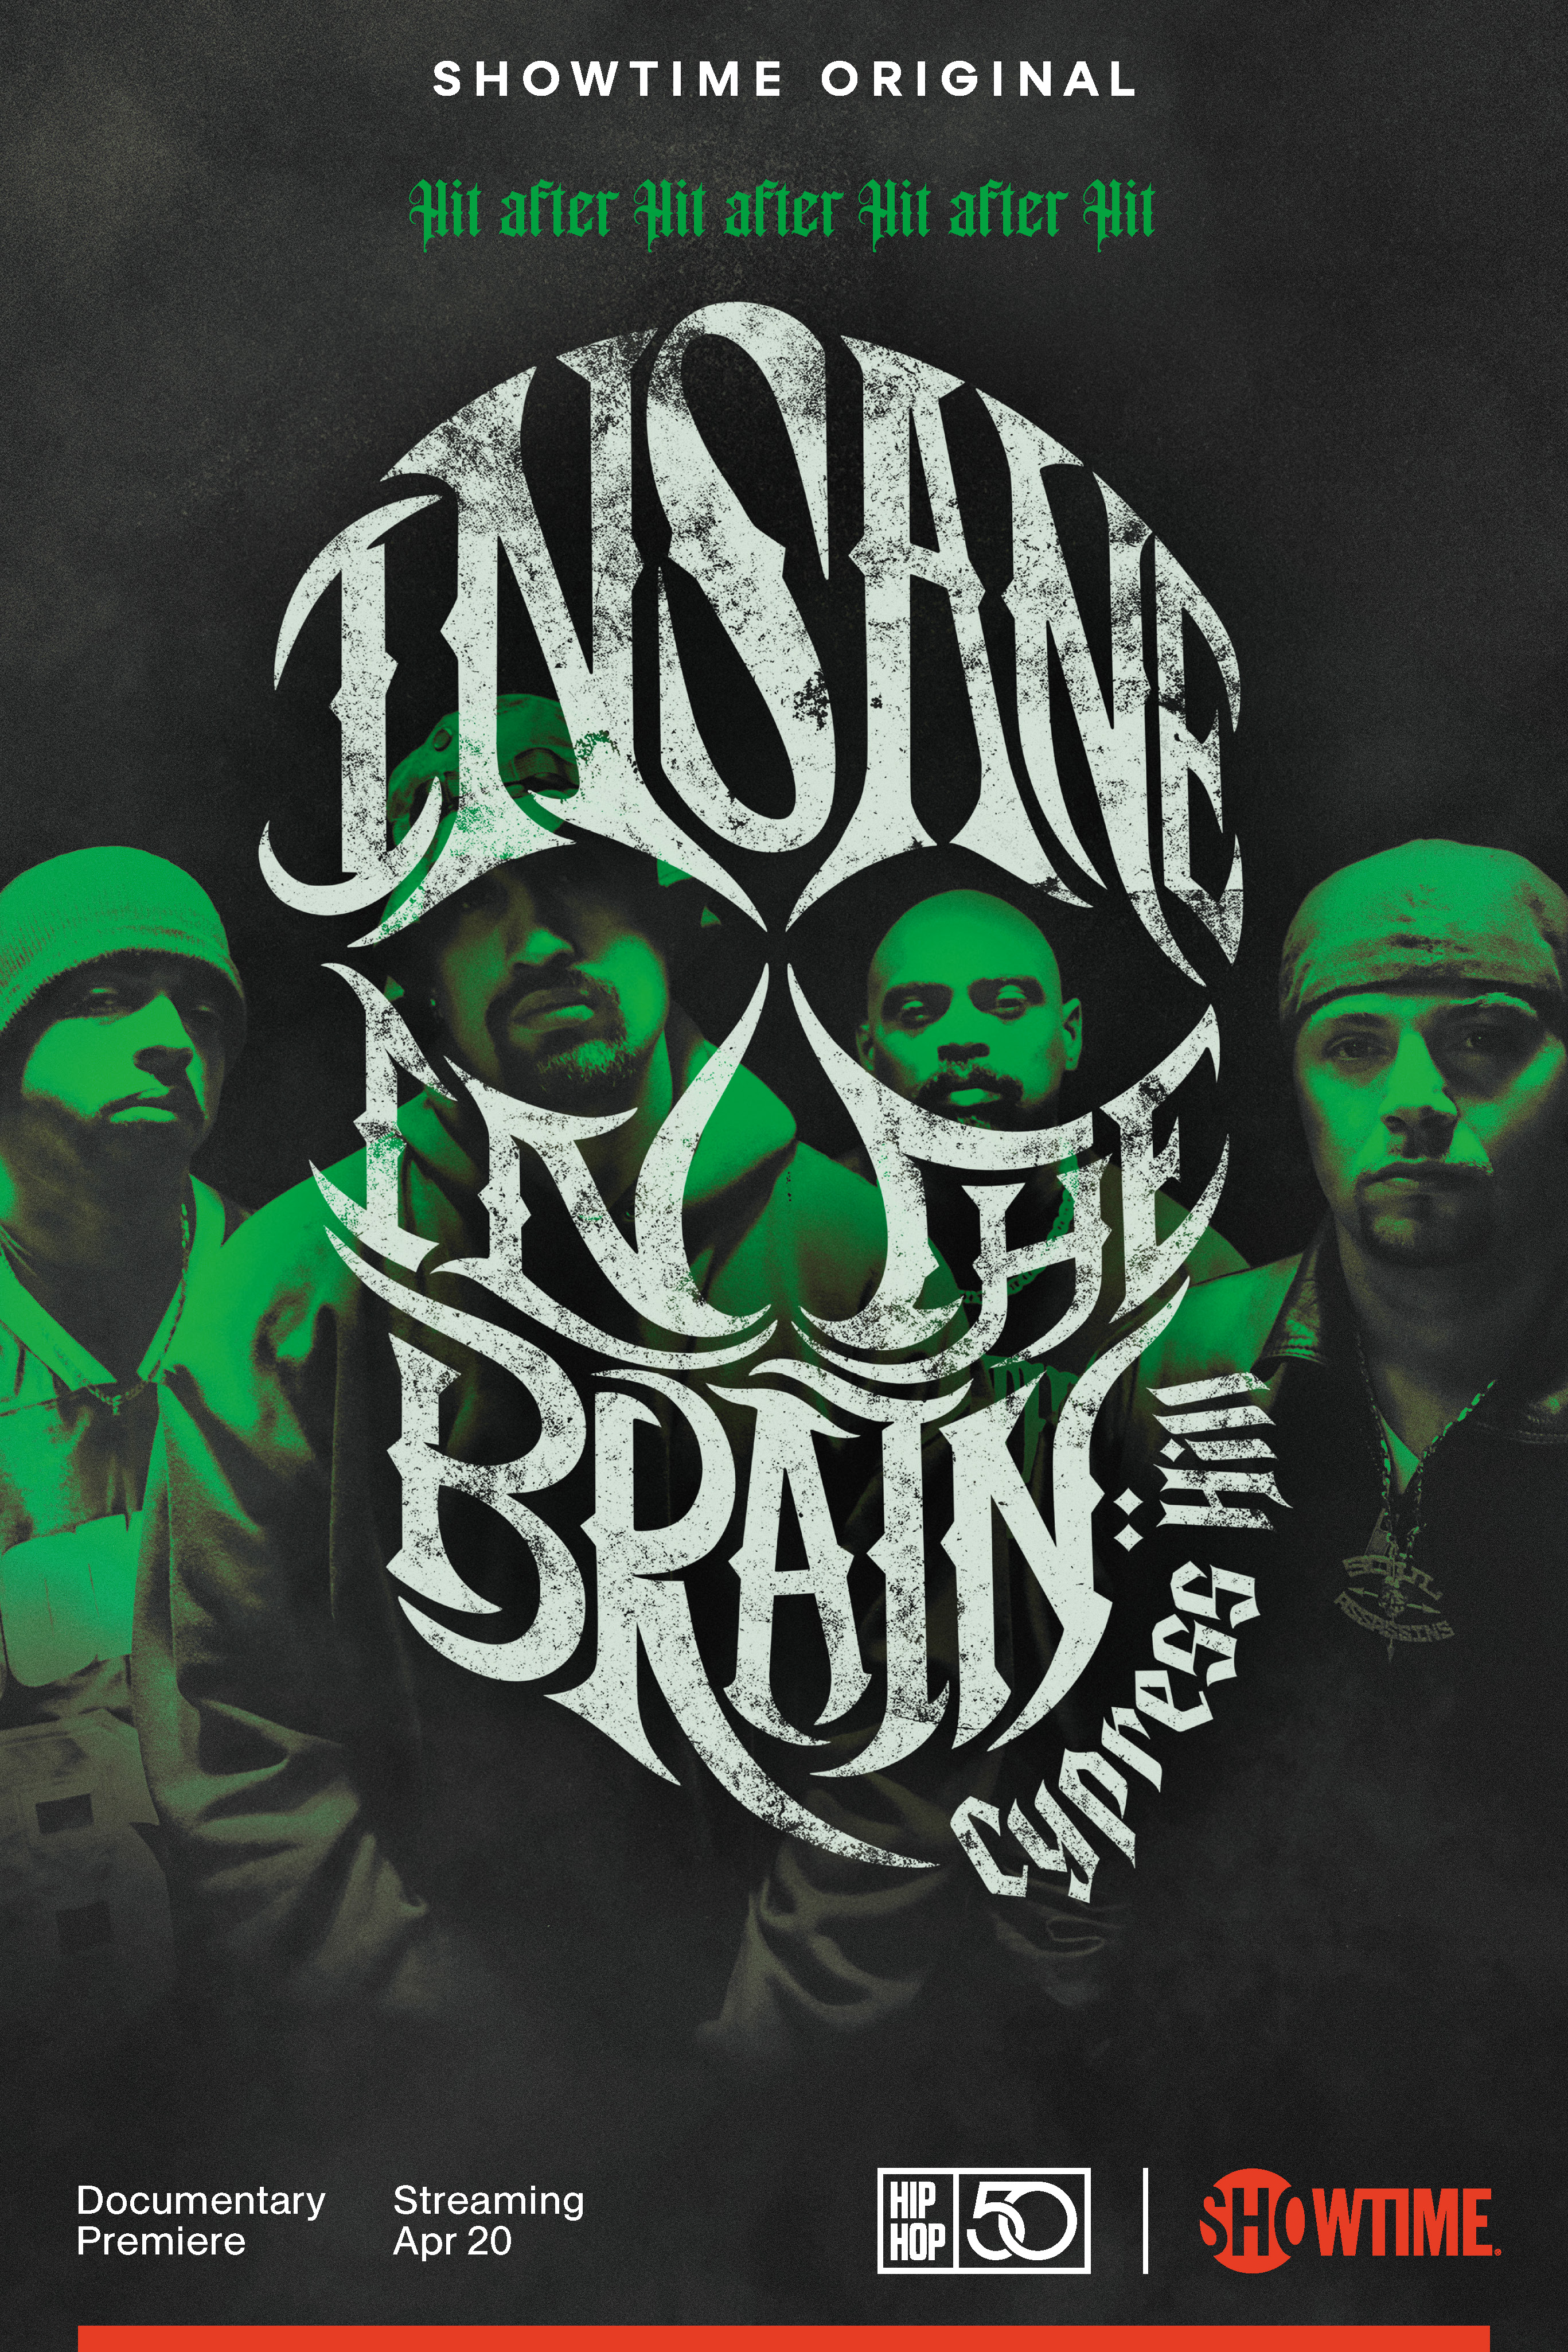 Movie poster for "Cypress Hill: Insane in the Brain". Part of Sony Music's Premium Content Division.